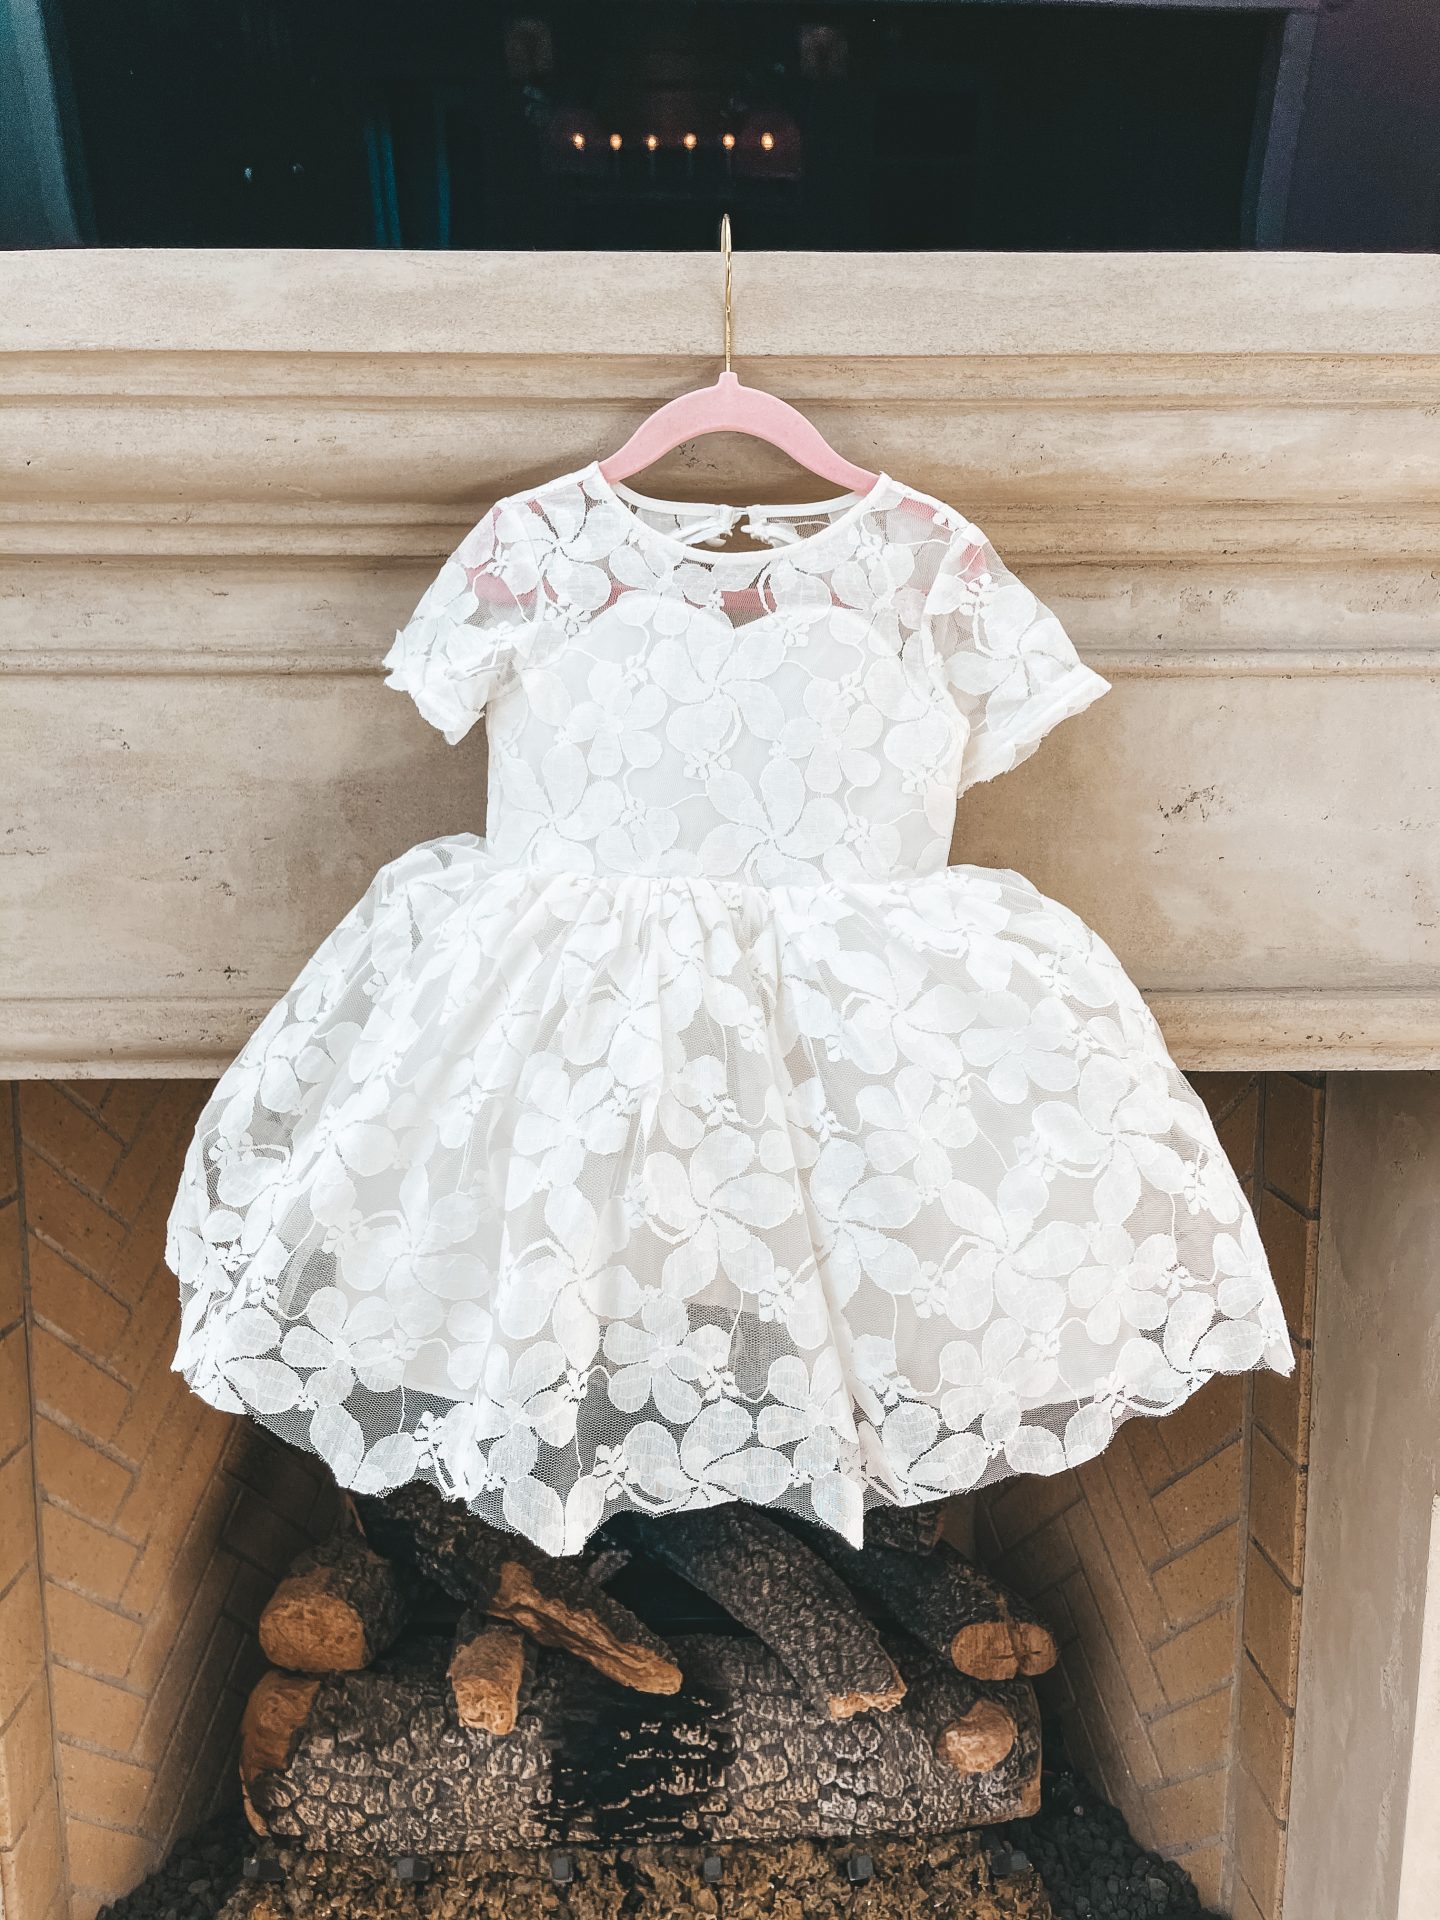 Mommy and Me Easter Dresses by Angela Lanter fashion blogger